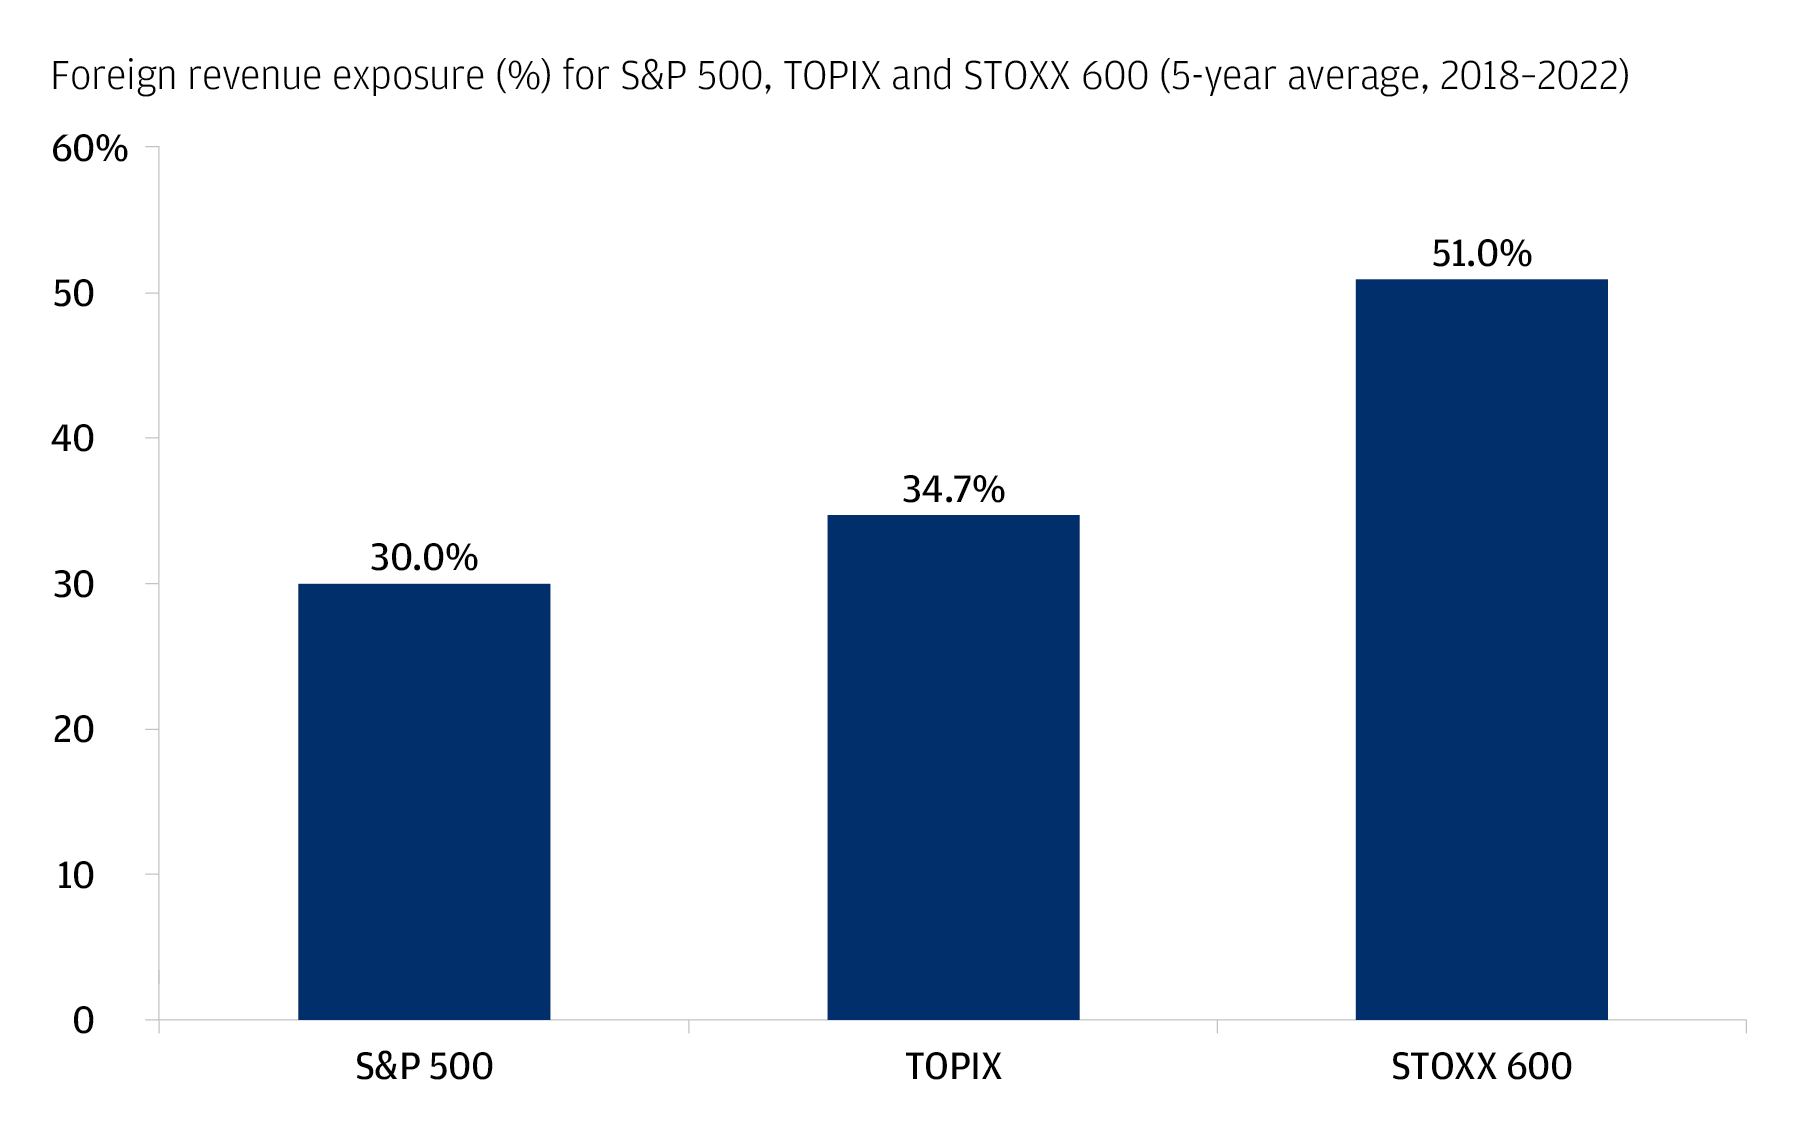 The chart is a bar chart that describes the foreign revenue exposure (%) for S&P 500, TOPIX, and STOXX 600 (5-year average from 2018 to 2022).